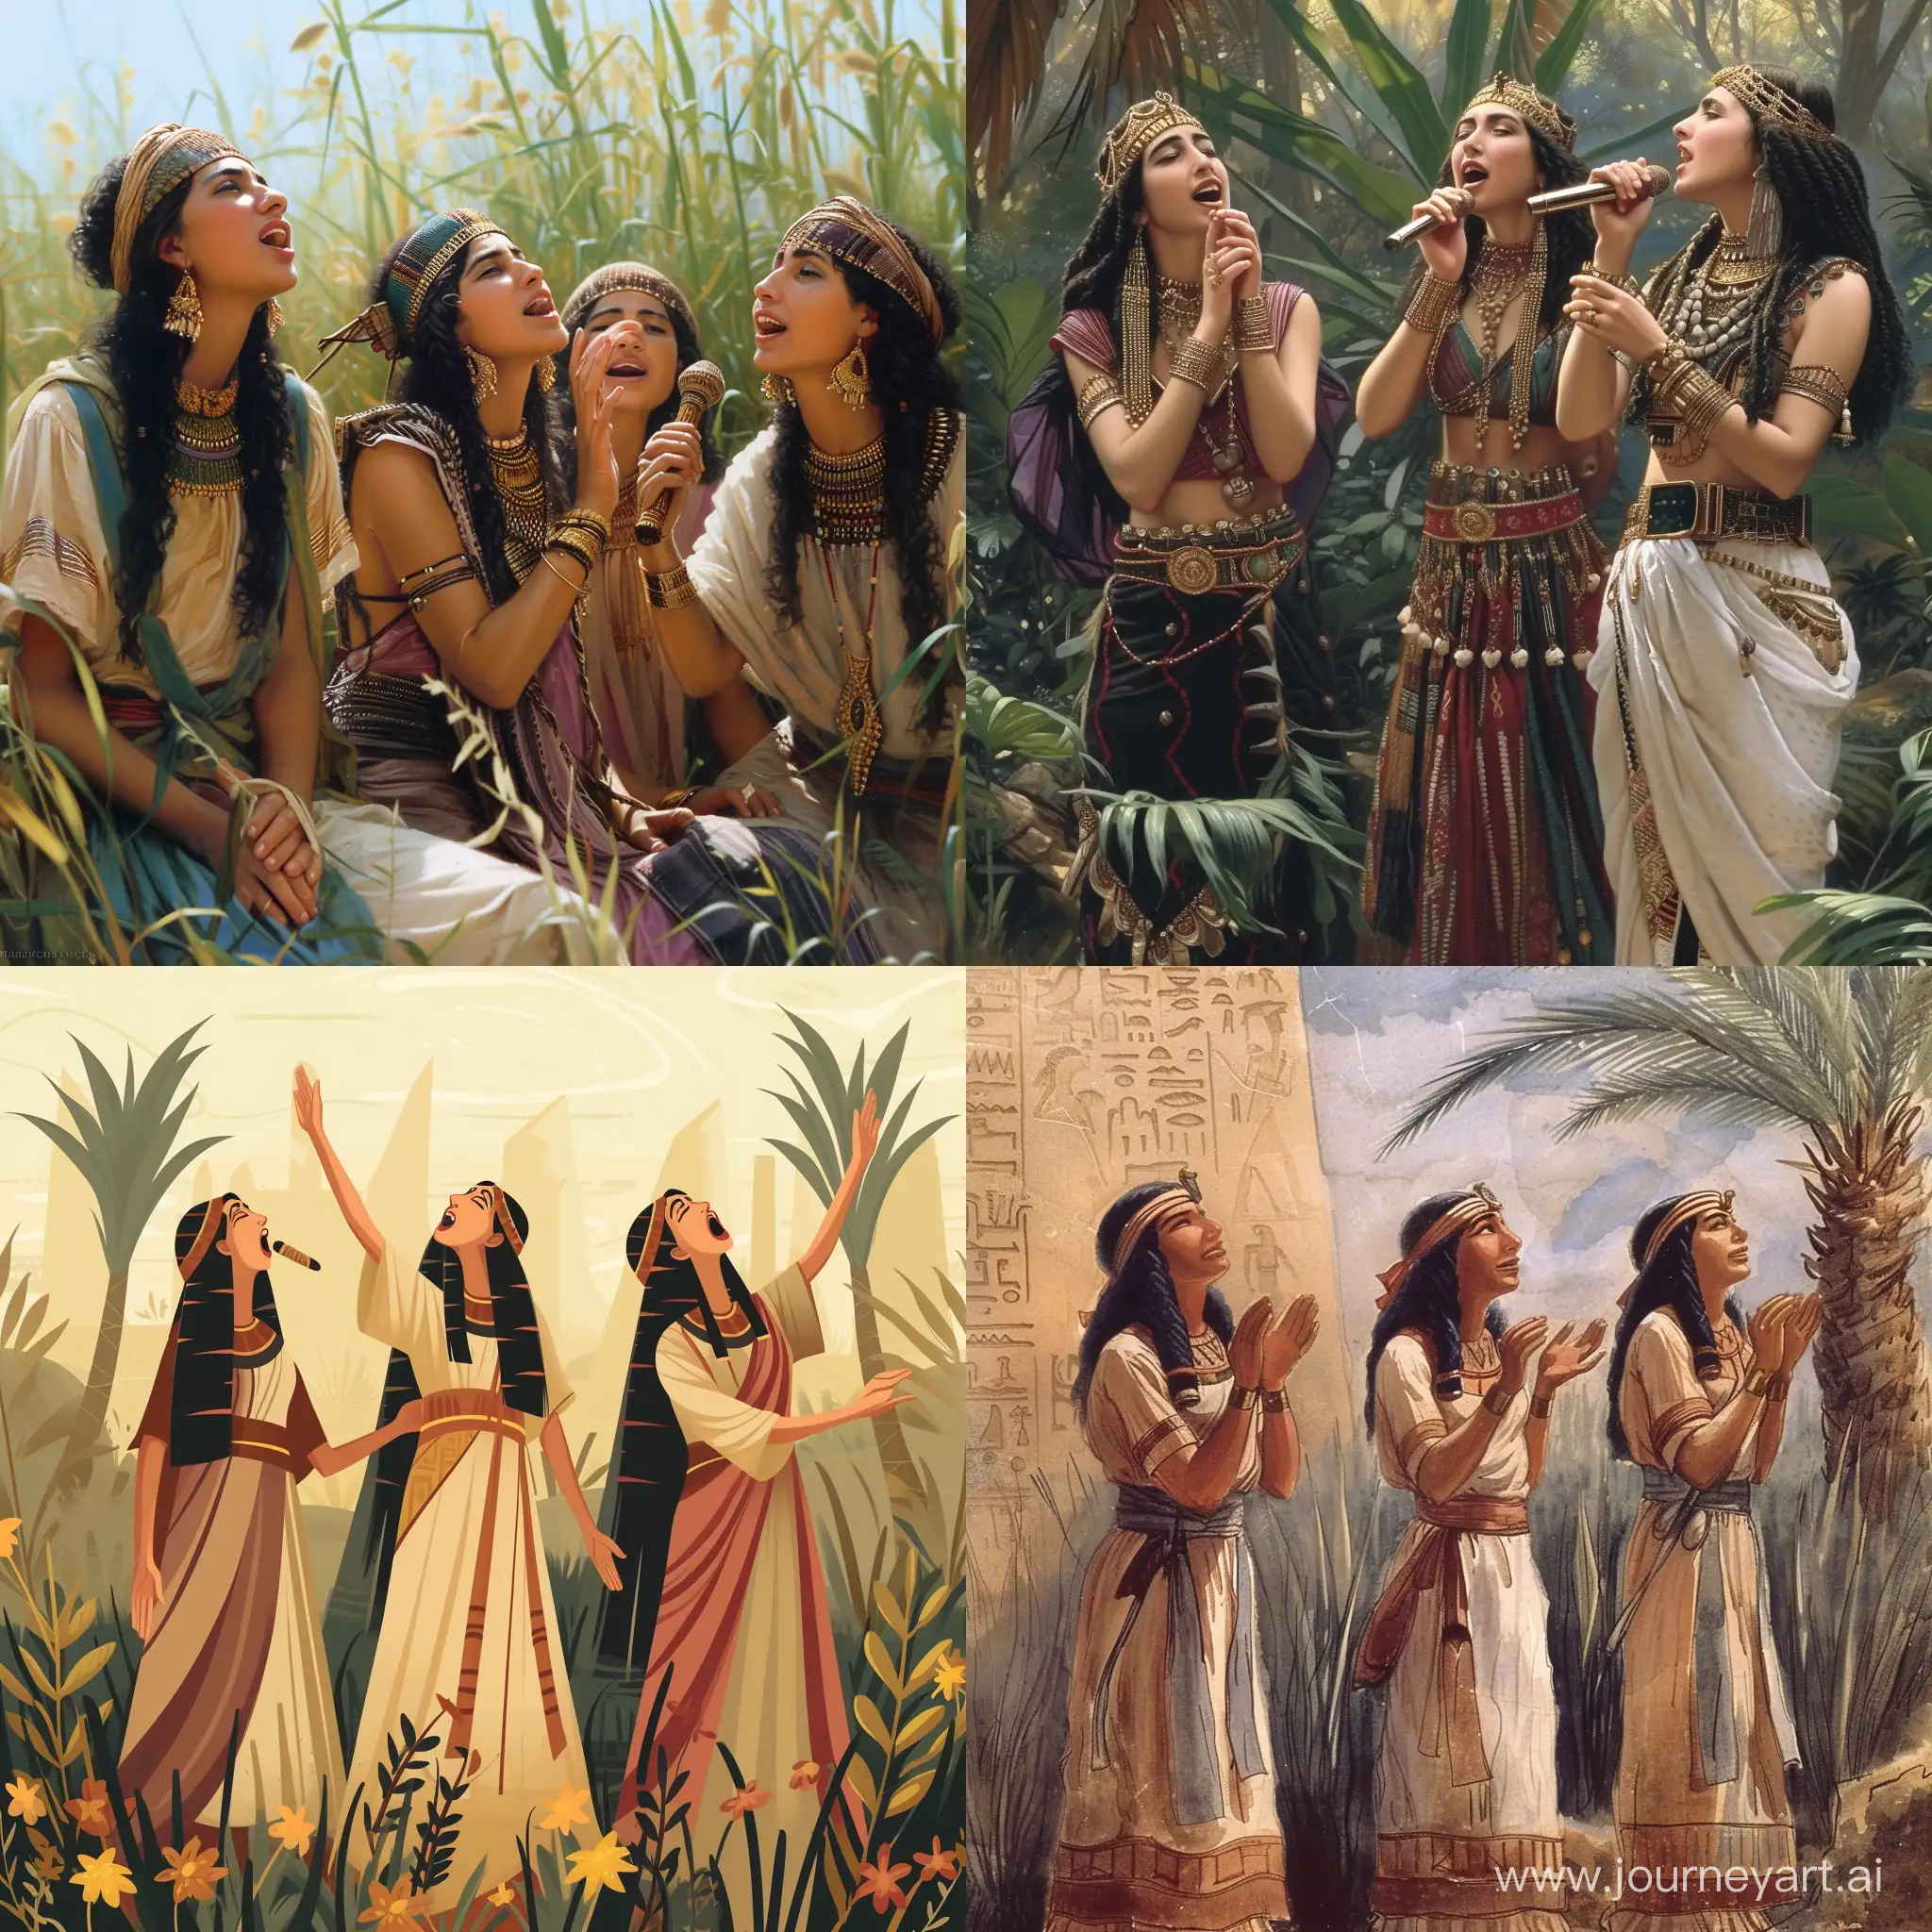 Egyptian women sing in nature